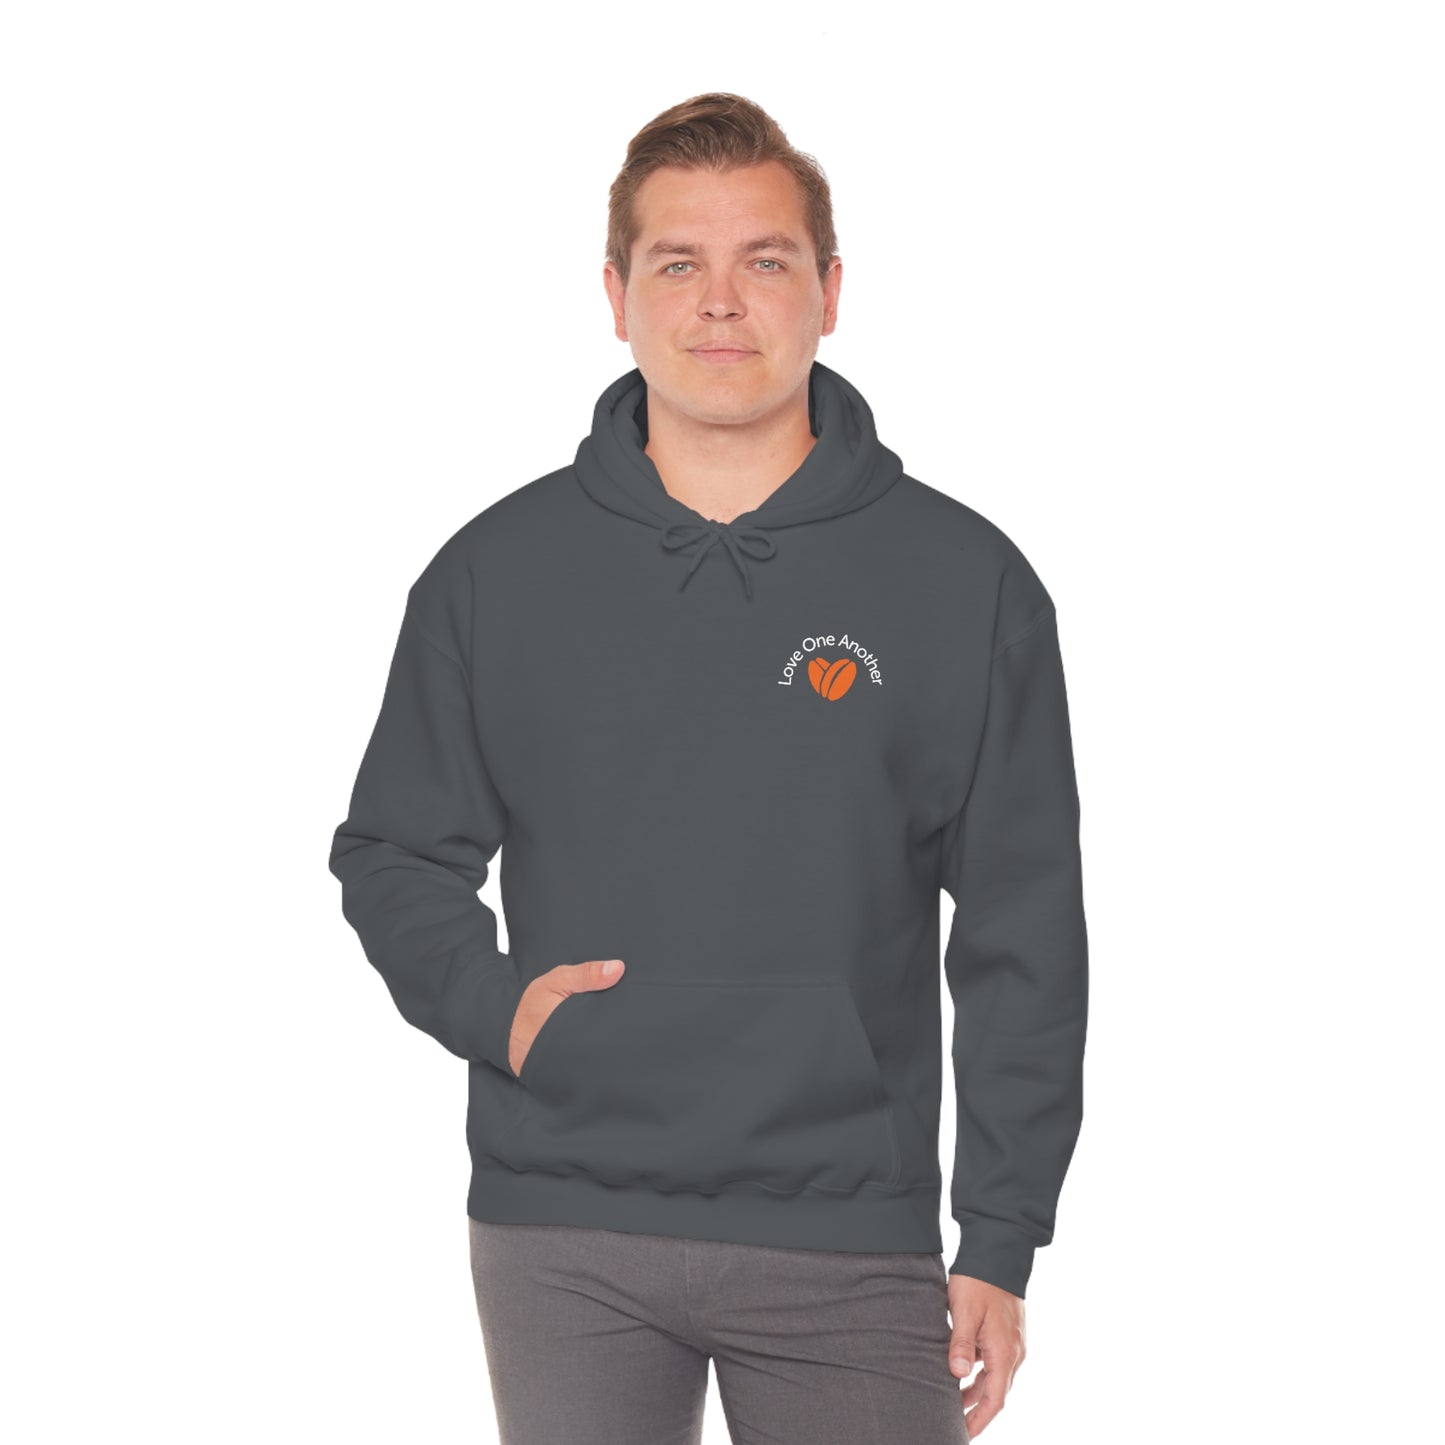 Love One Another Hooded Sweatshirt